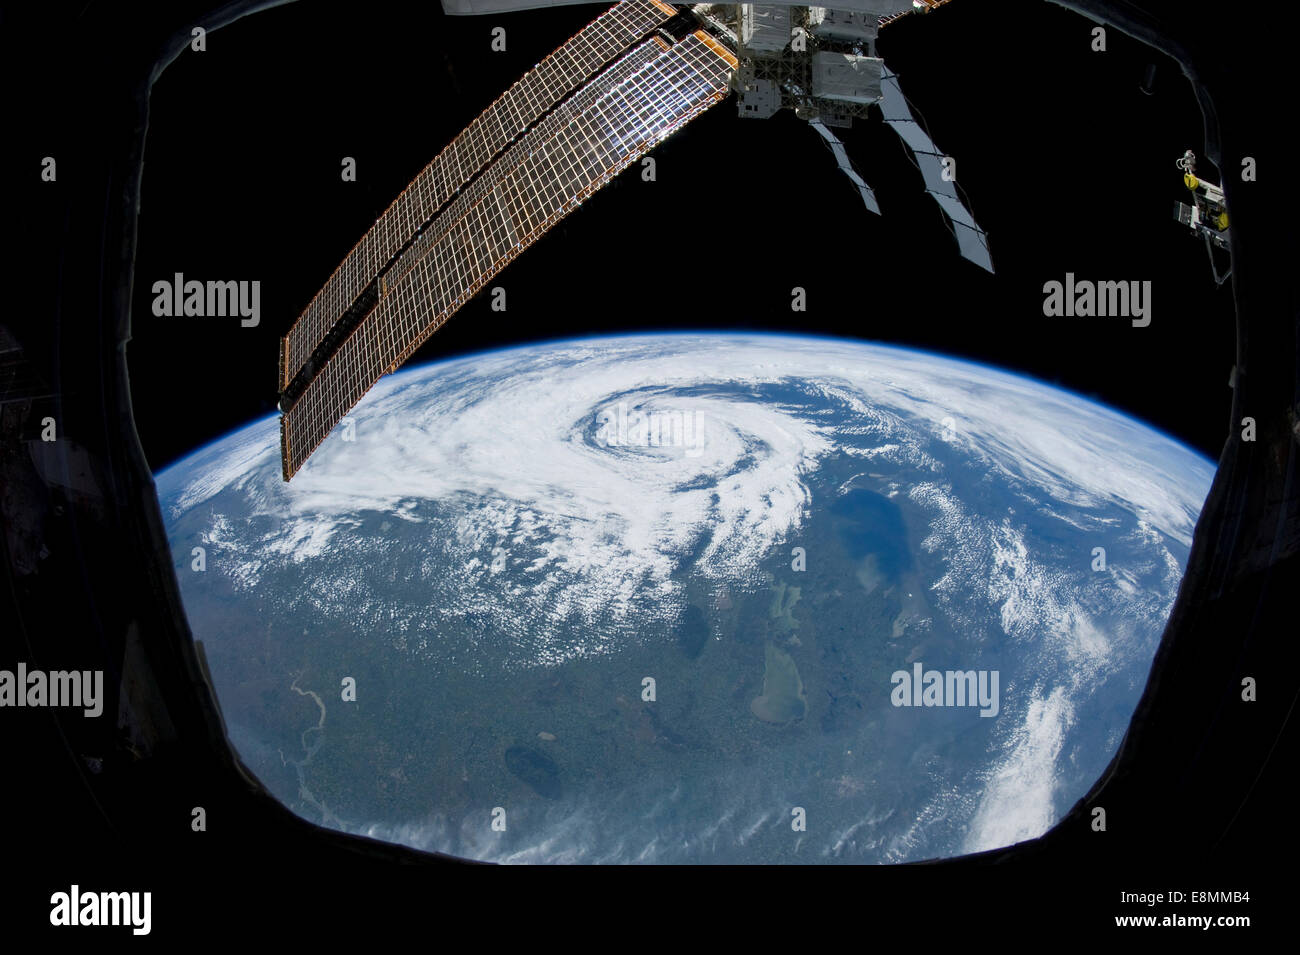 June 27, 2012 - Tropical cyclone located over northern Saskatchewan, Canada, as viewed from the cupola aboard the International Stock Photo